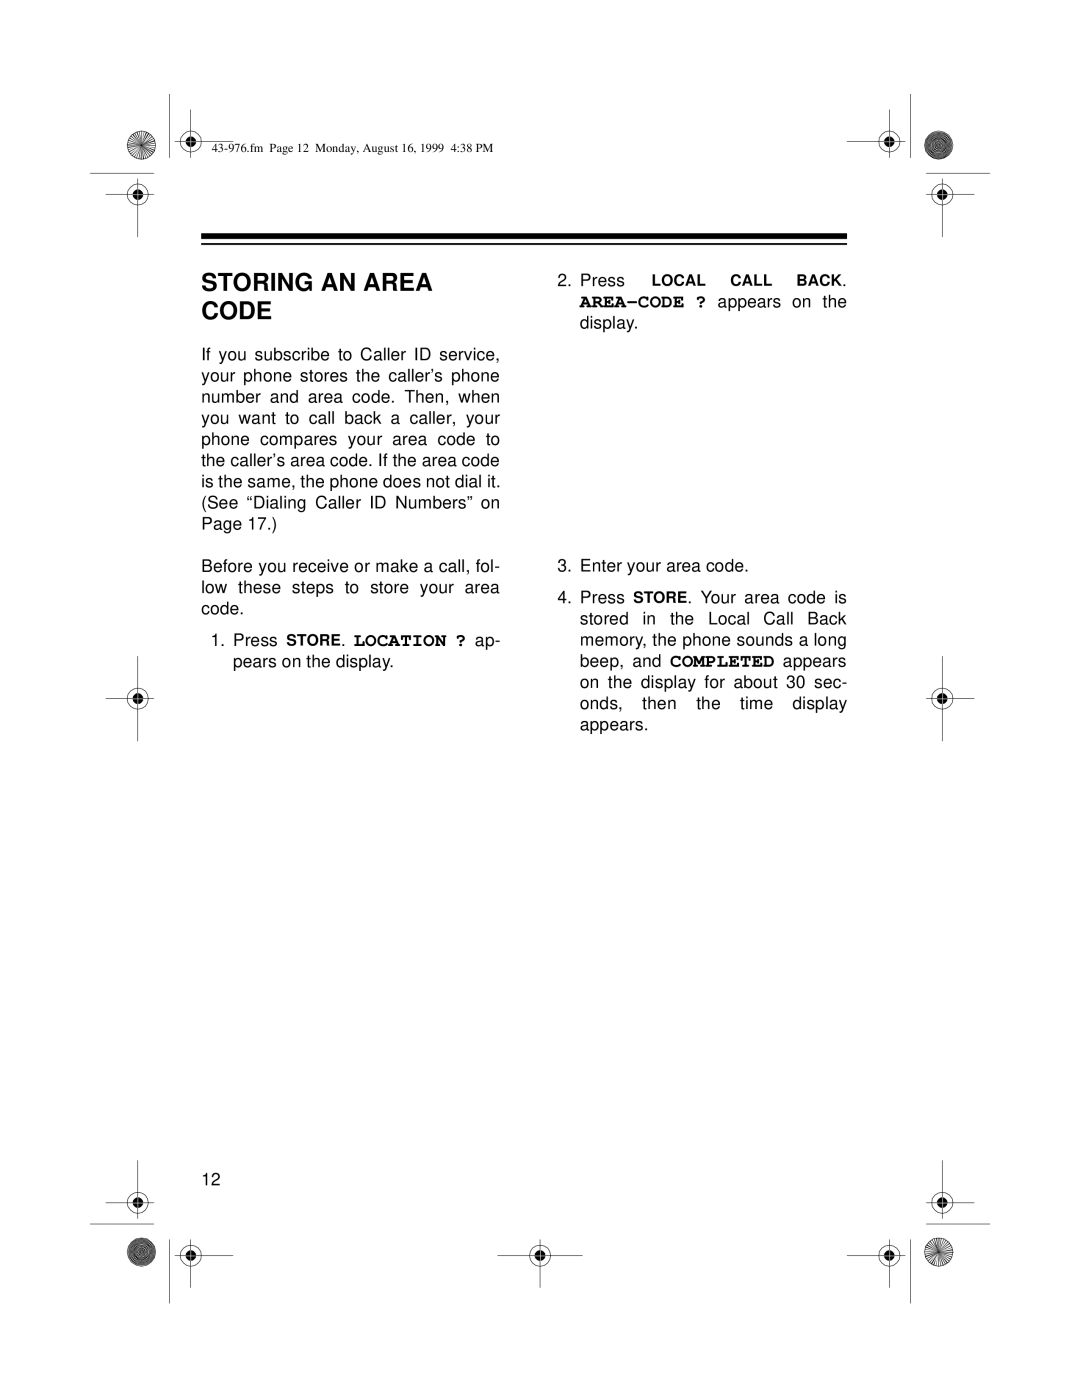 Radio Shack 1500 owner manual Storing An Area Code 